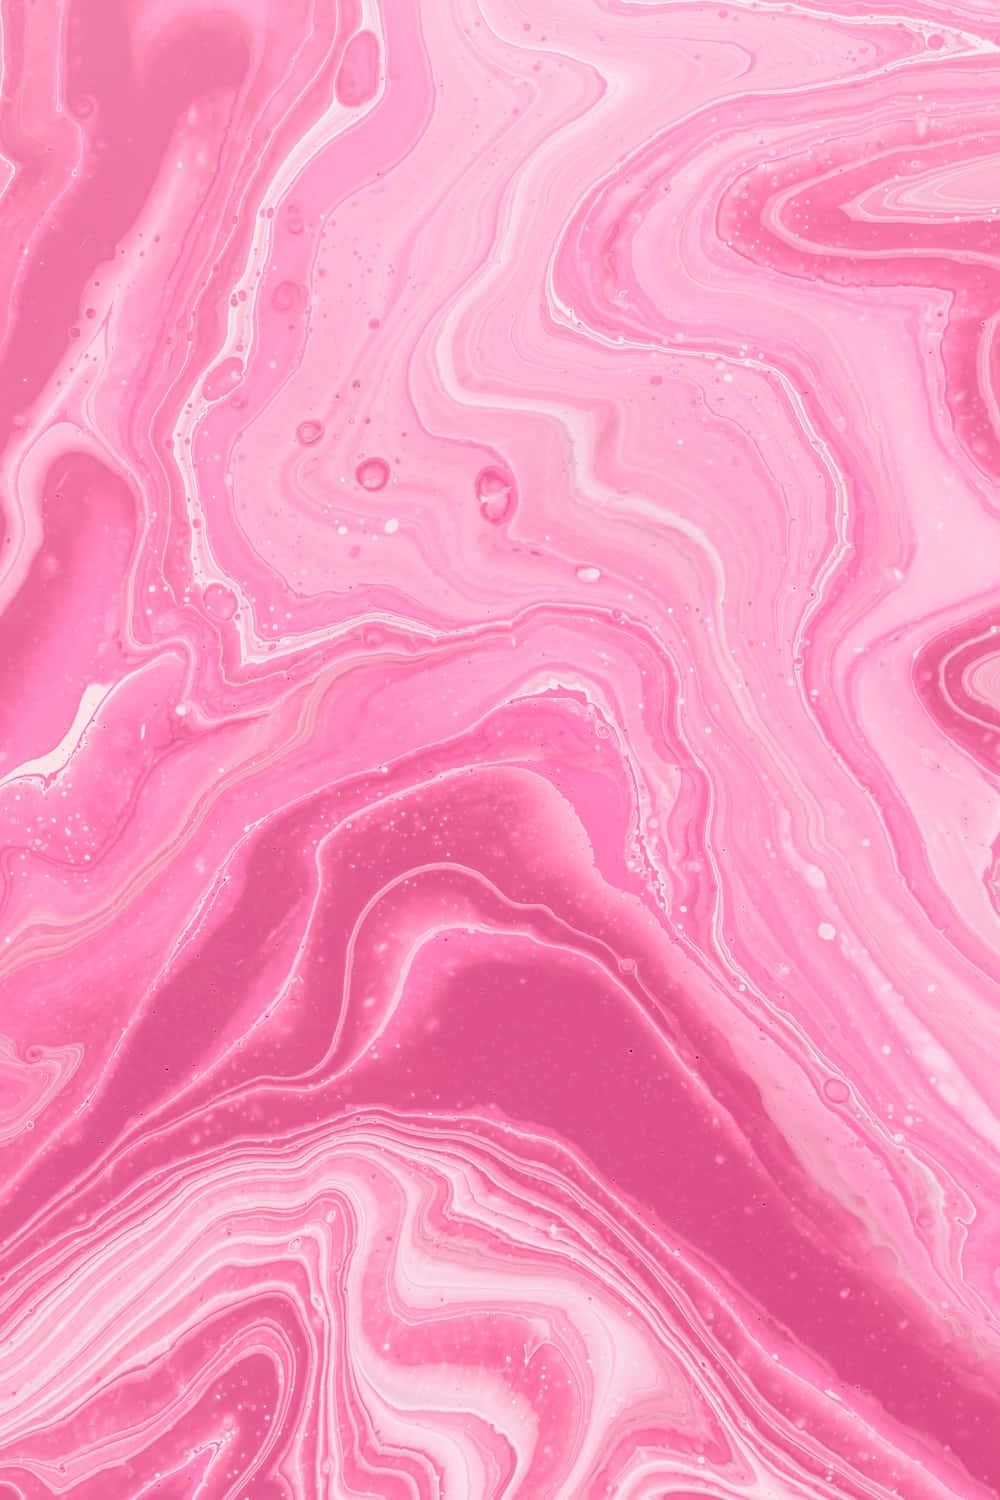 pink marble texture wallpaper